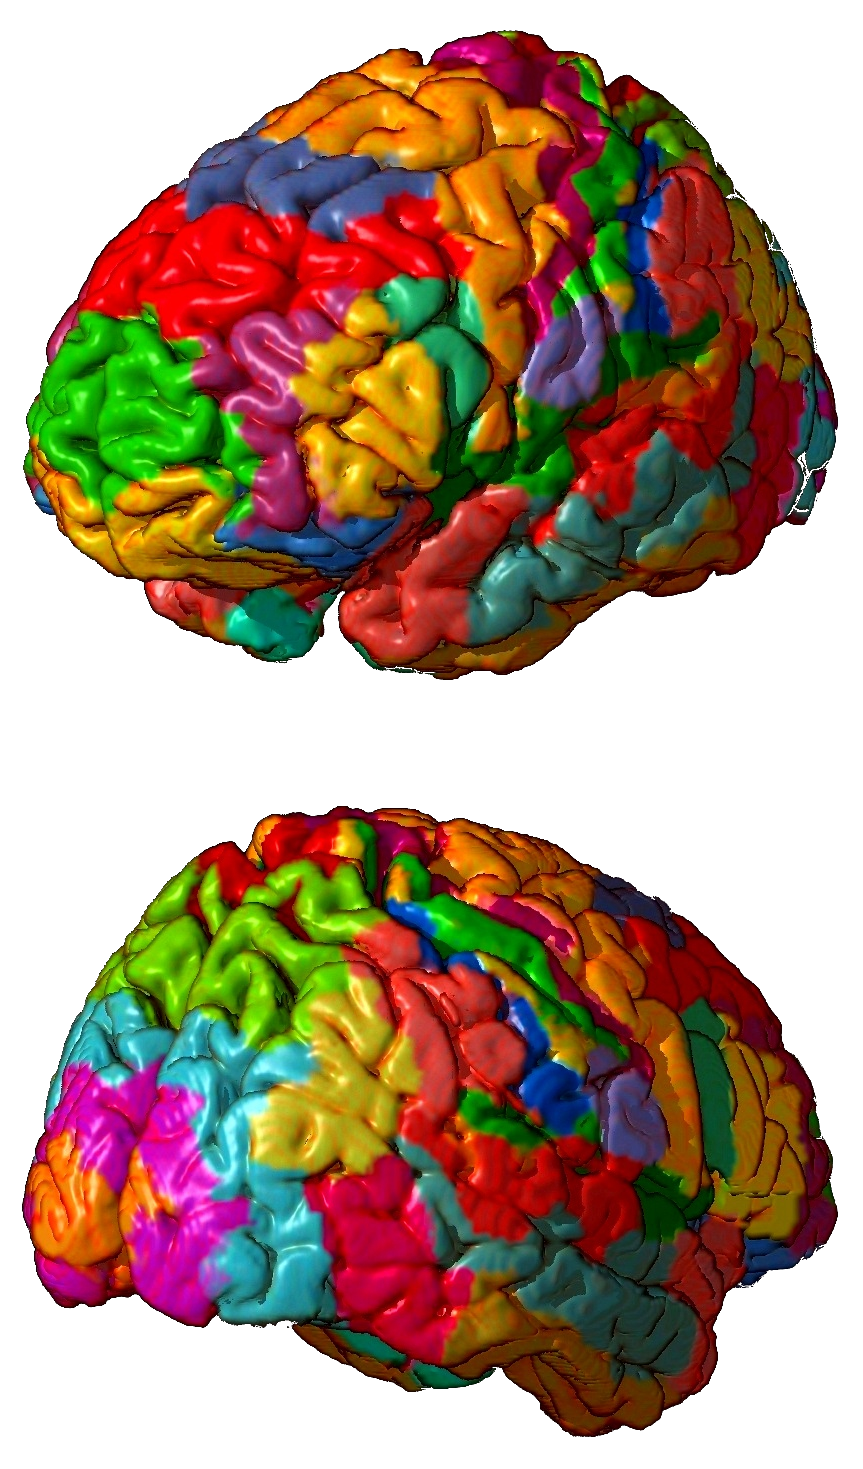 Mapping the brain: scientists define 180 distinct regions, but what now?